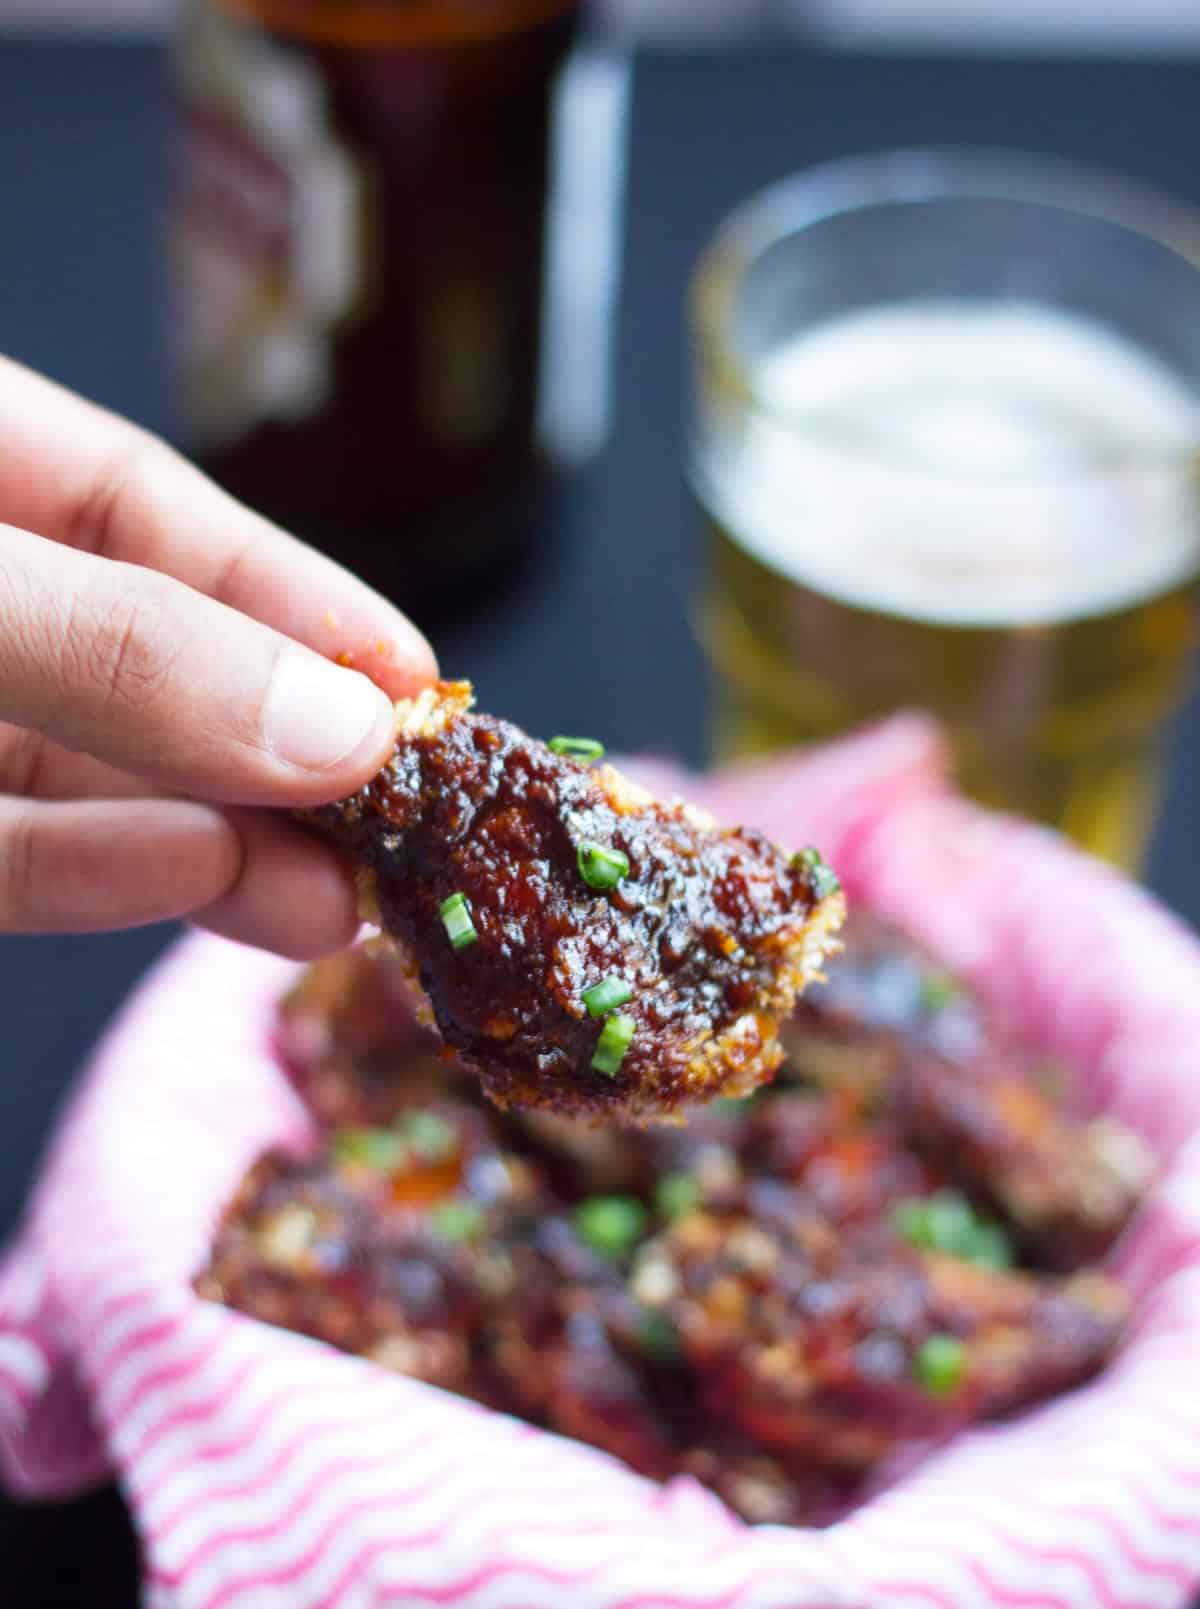 Picking a baked sticky chicken wing up.